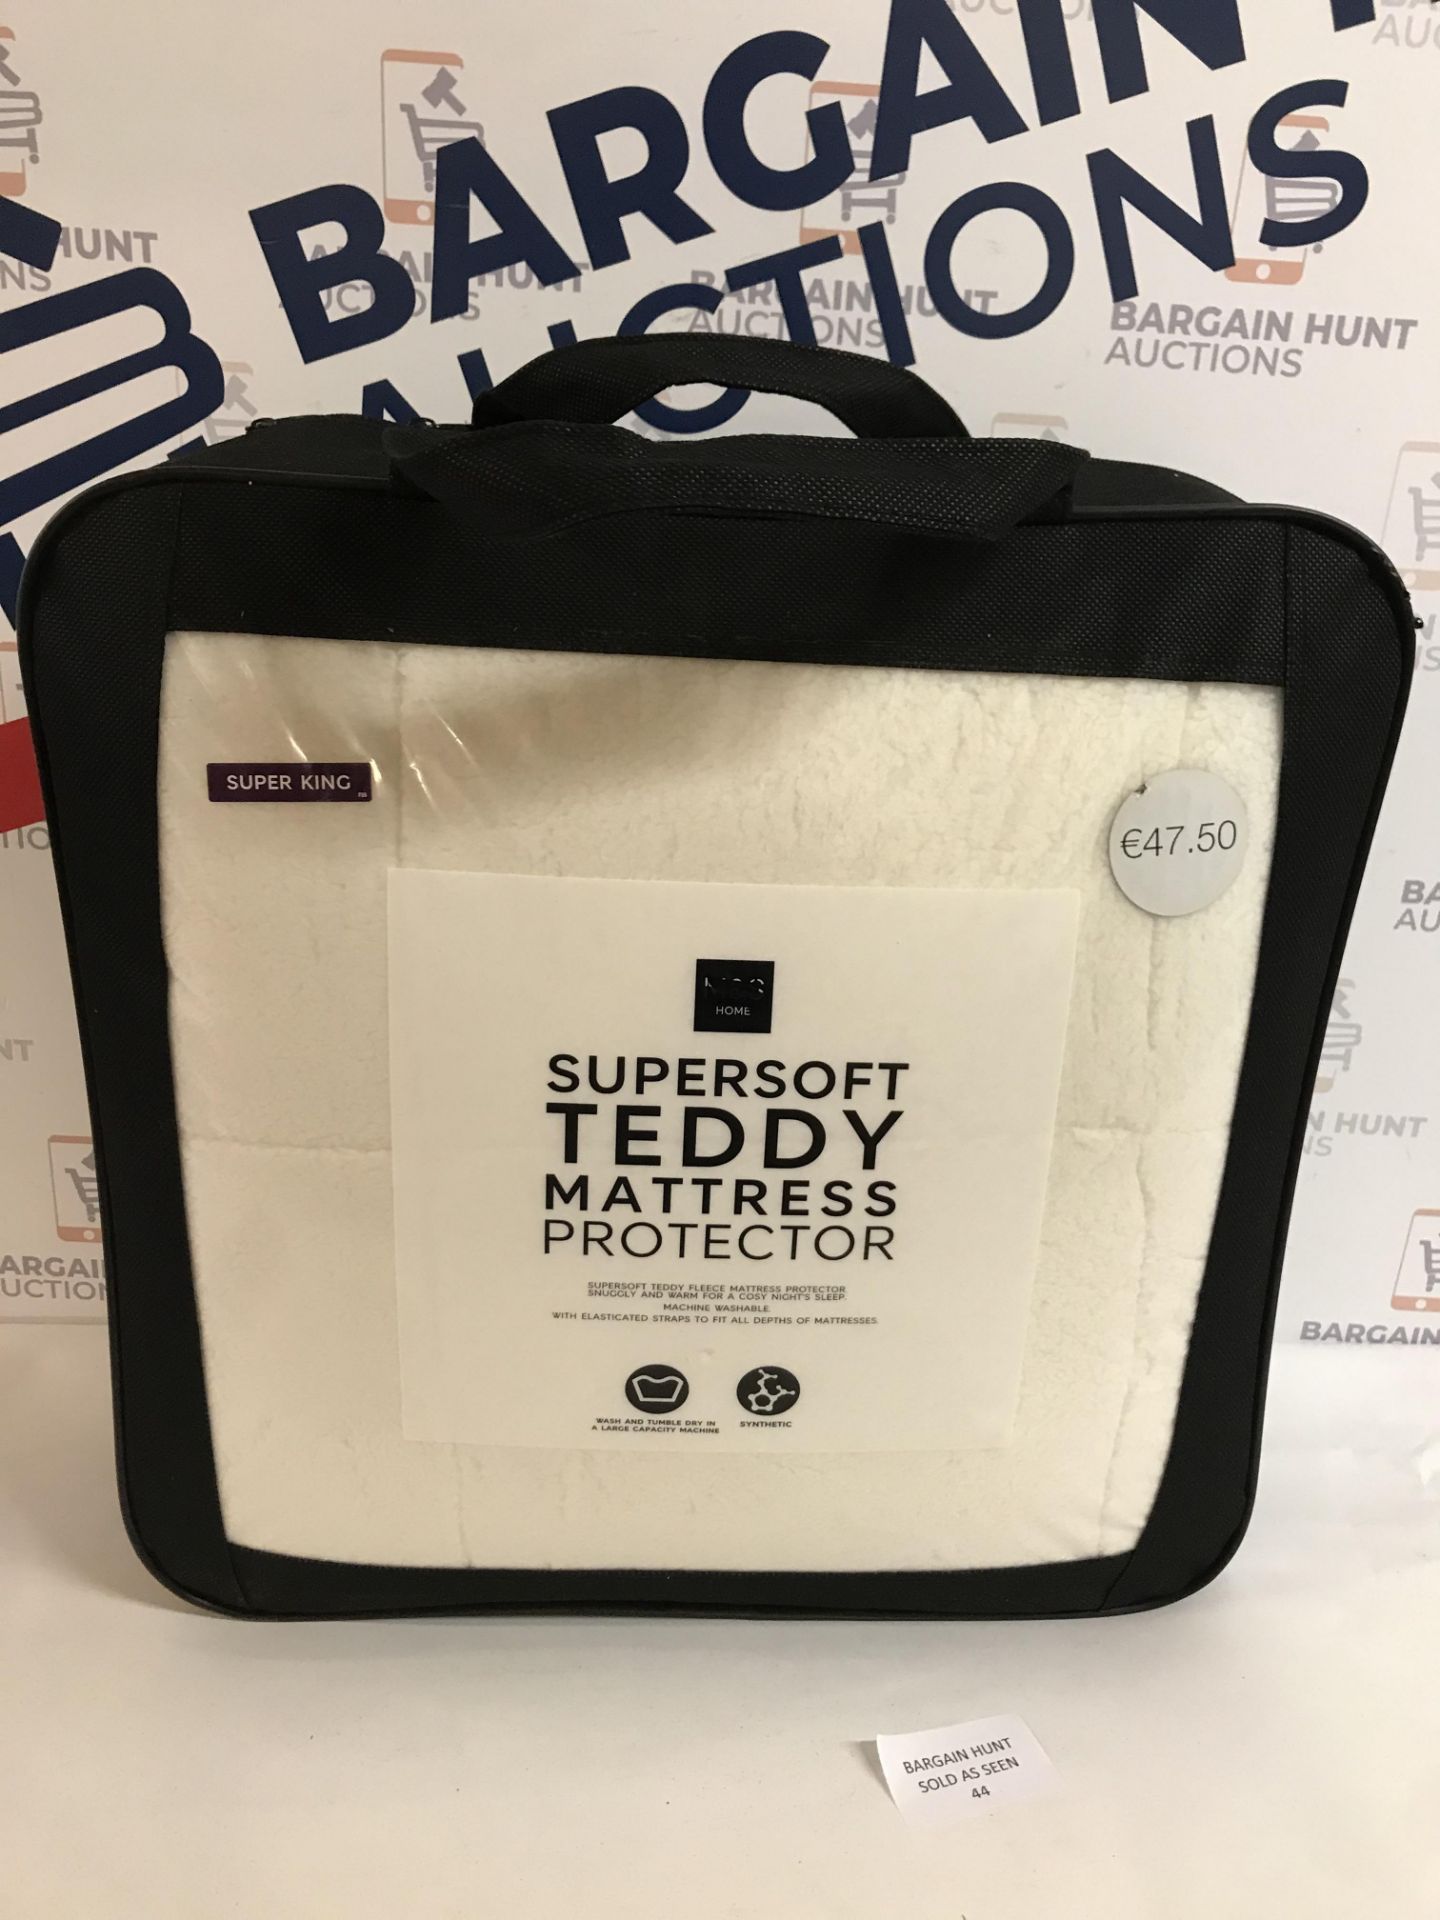 Supersoft Teddy Mattress Protector, Super King